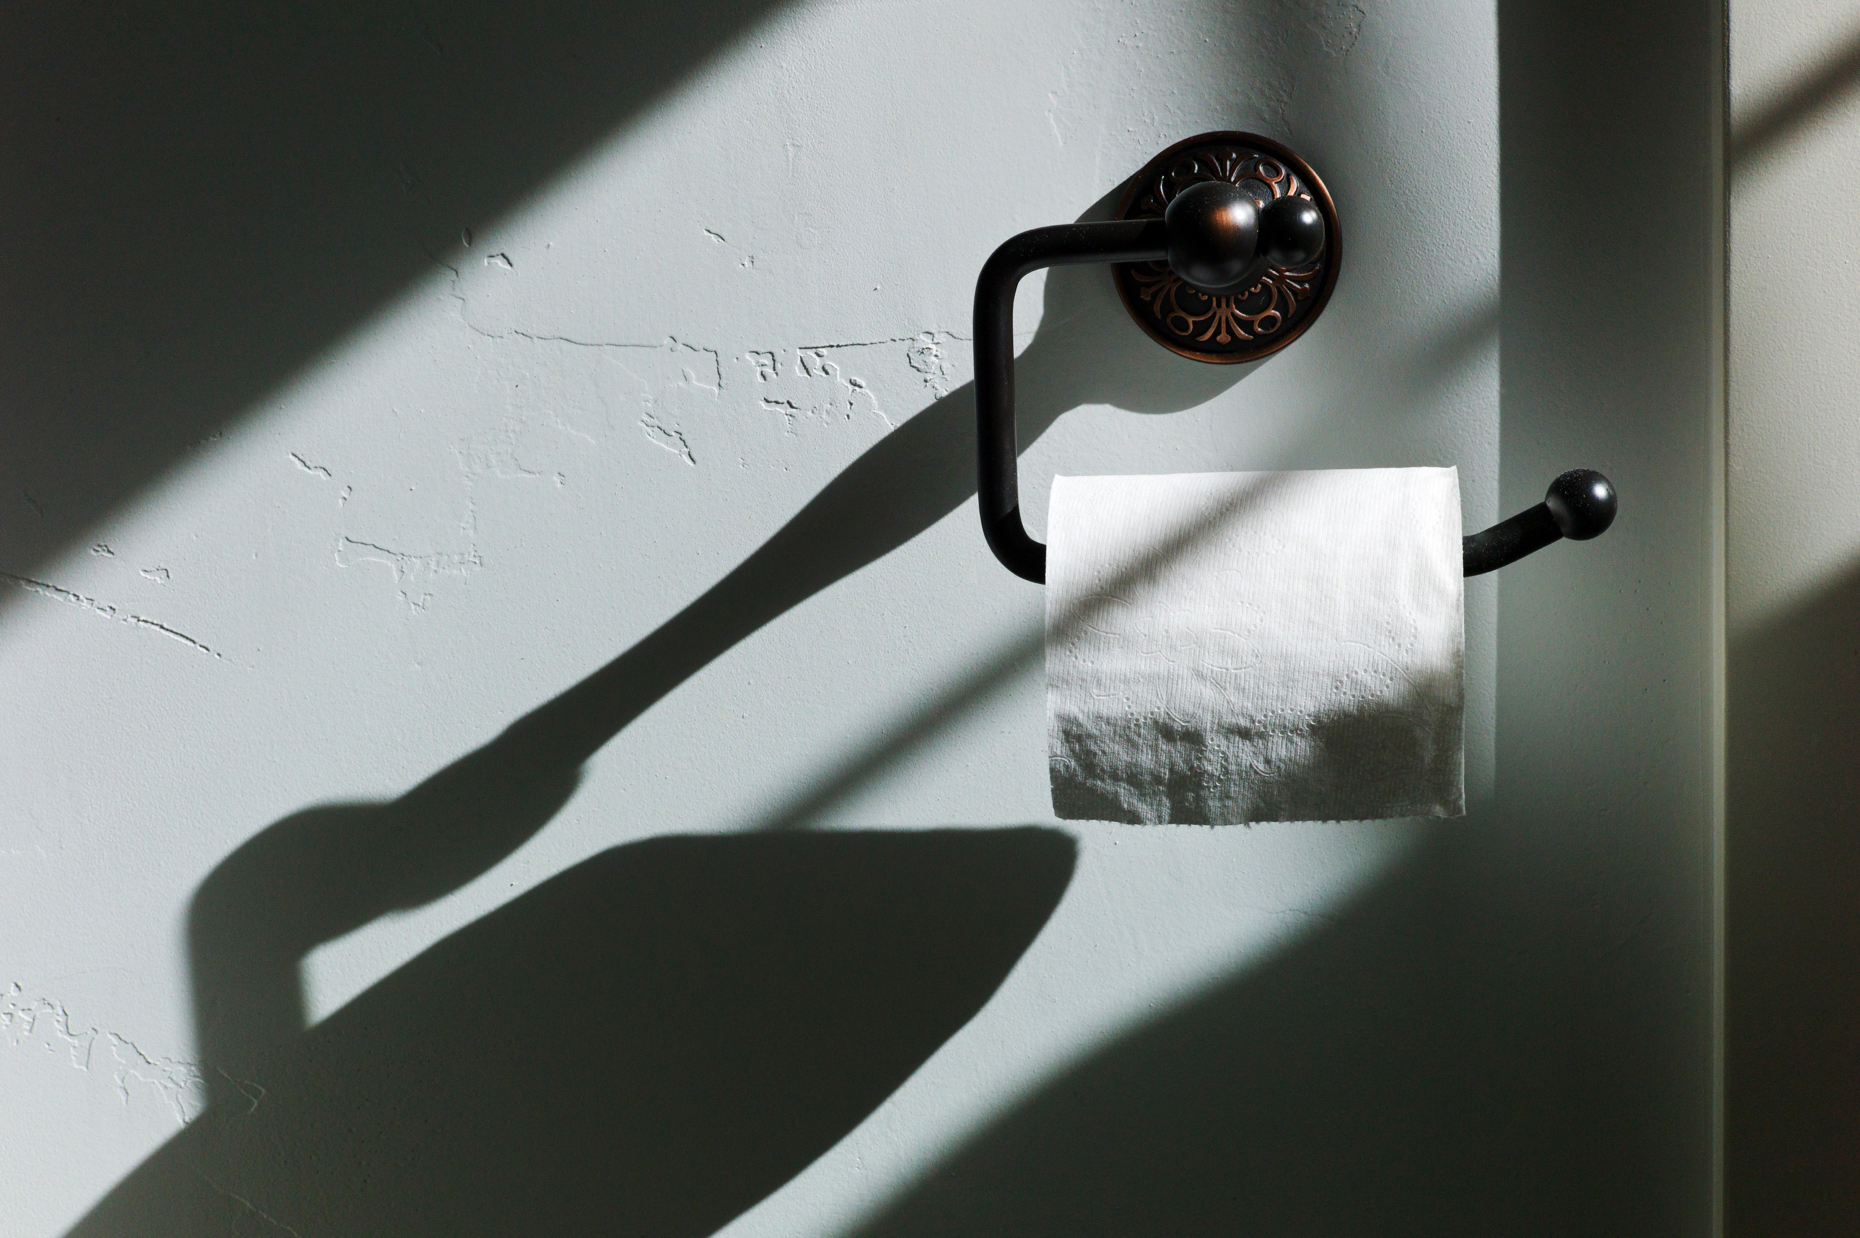 Close up photograph of sun and shadows on a roll of toilet paper in a bathroom